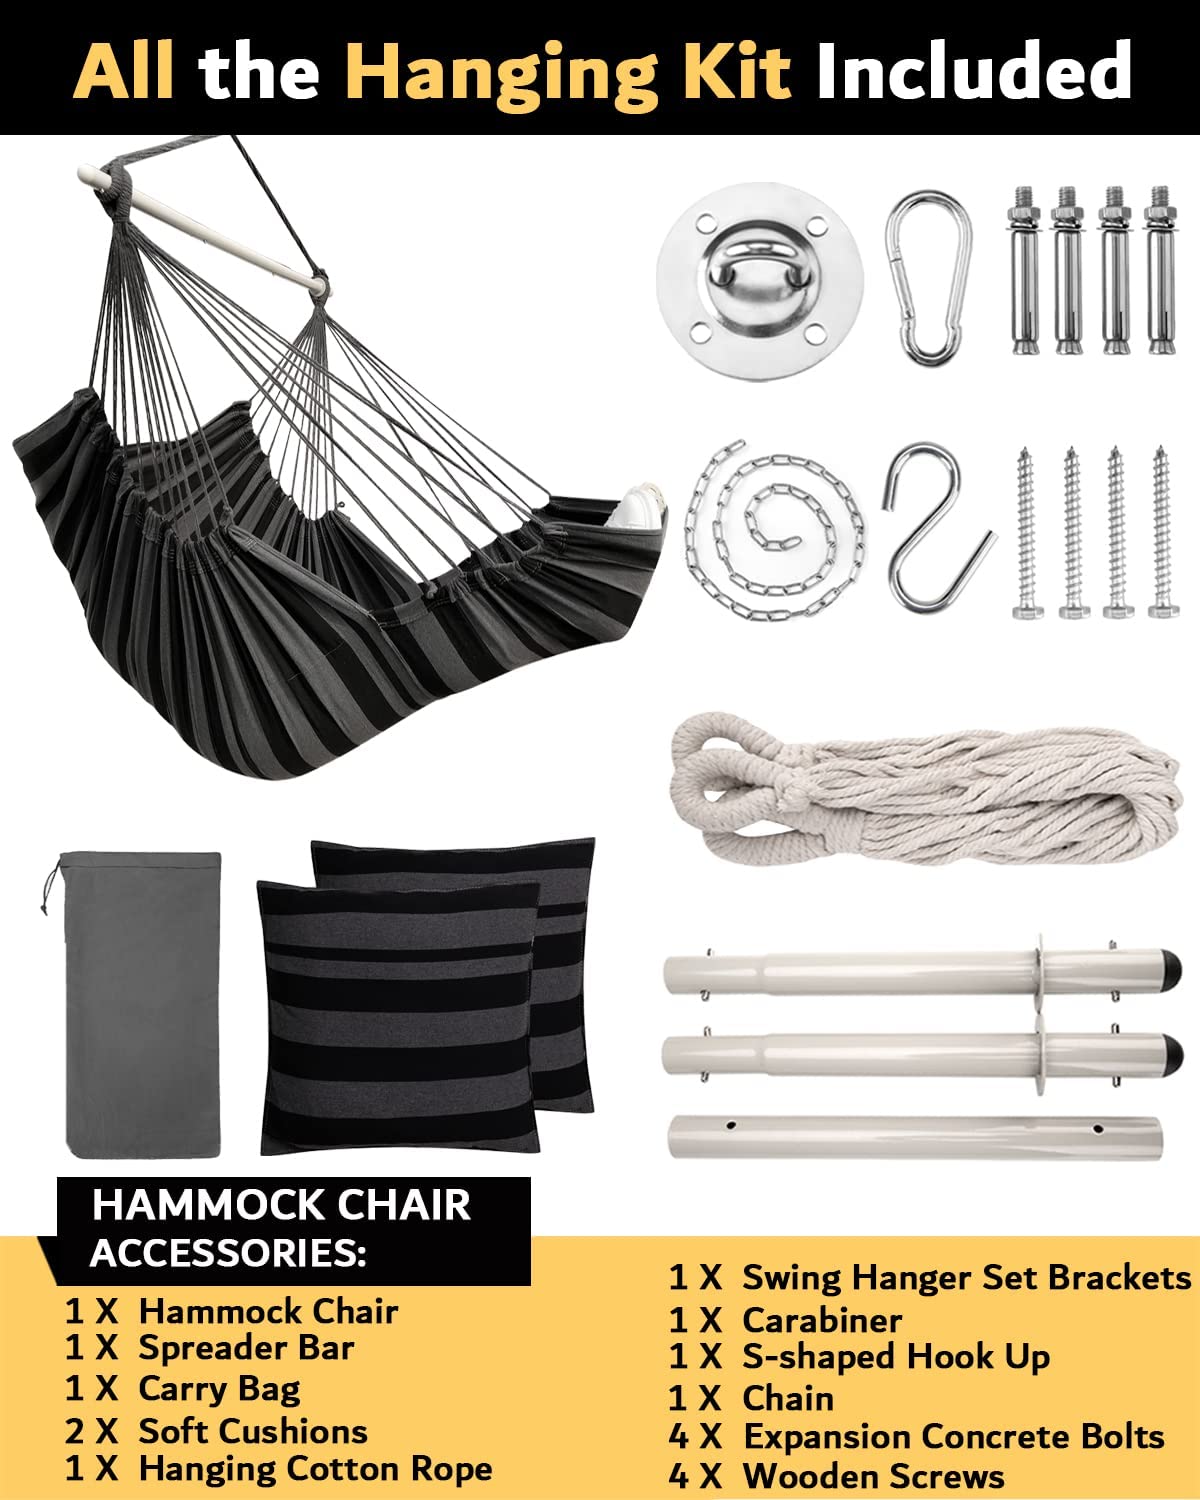 Hammock Chair Swing with Foot Rest, Side Pocket, and Pillows - Cotton Weave